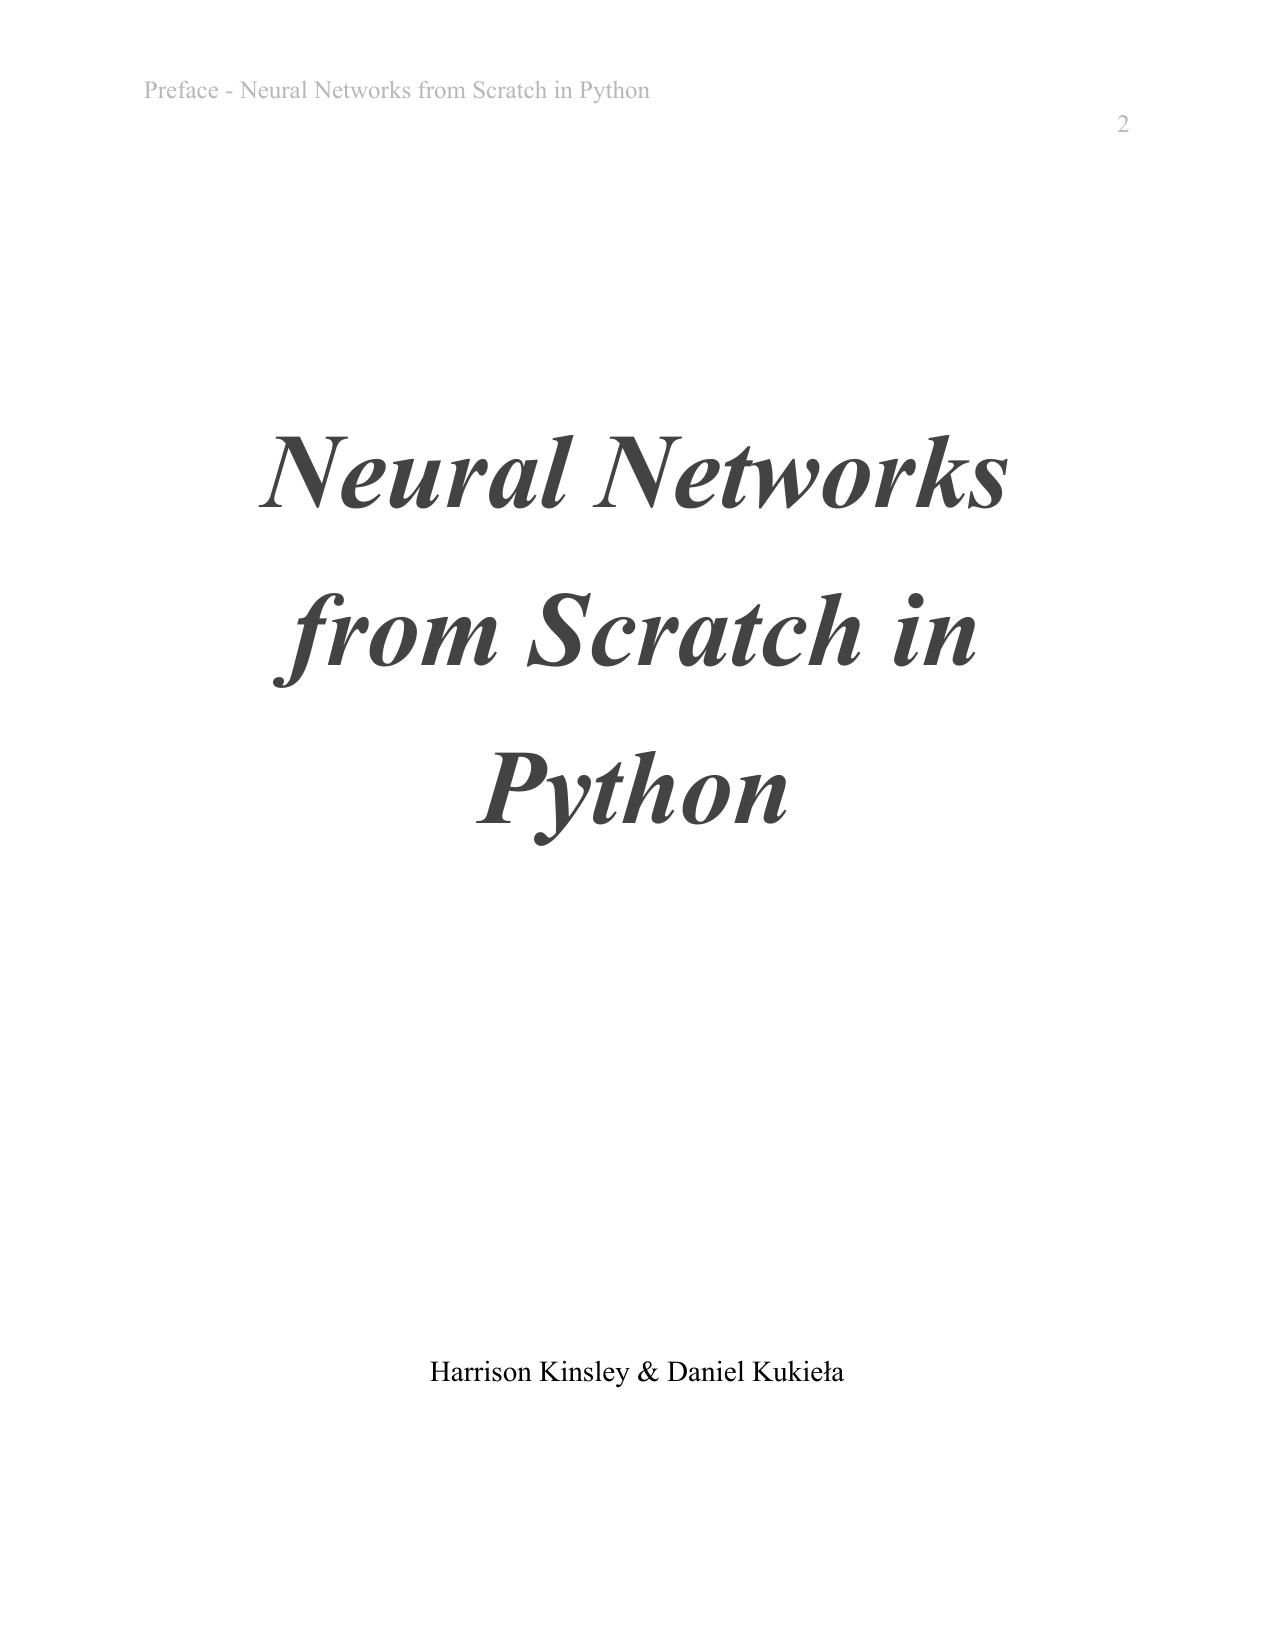 Neural Networks From Scratch in Python